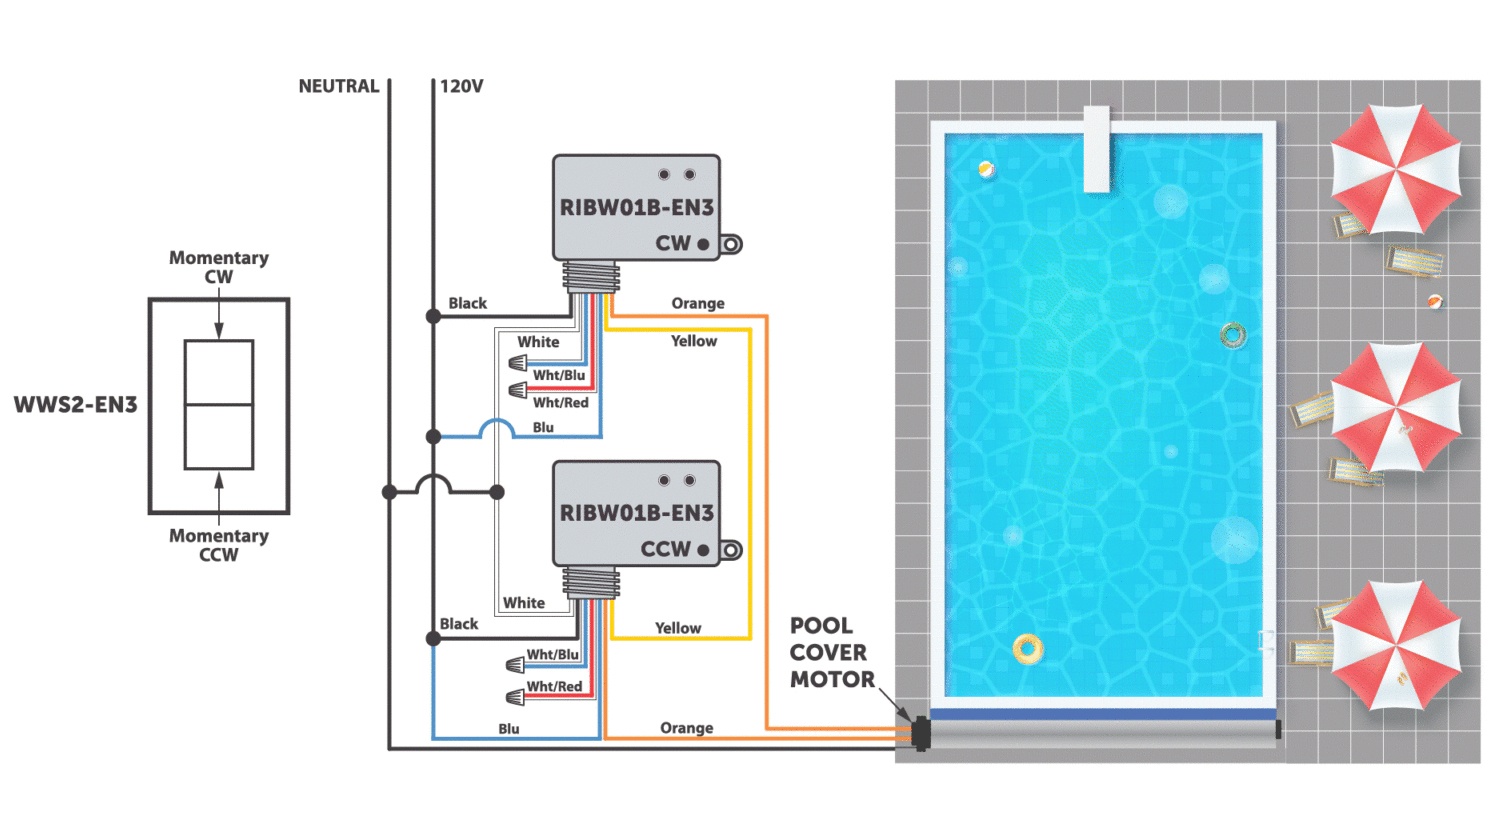 RIB® Relays Controlling Pool Cover w/ EnOcean Enabled Devices